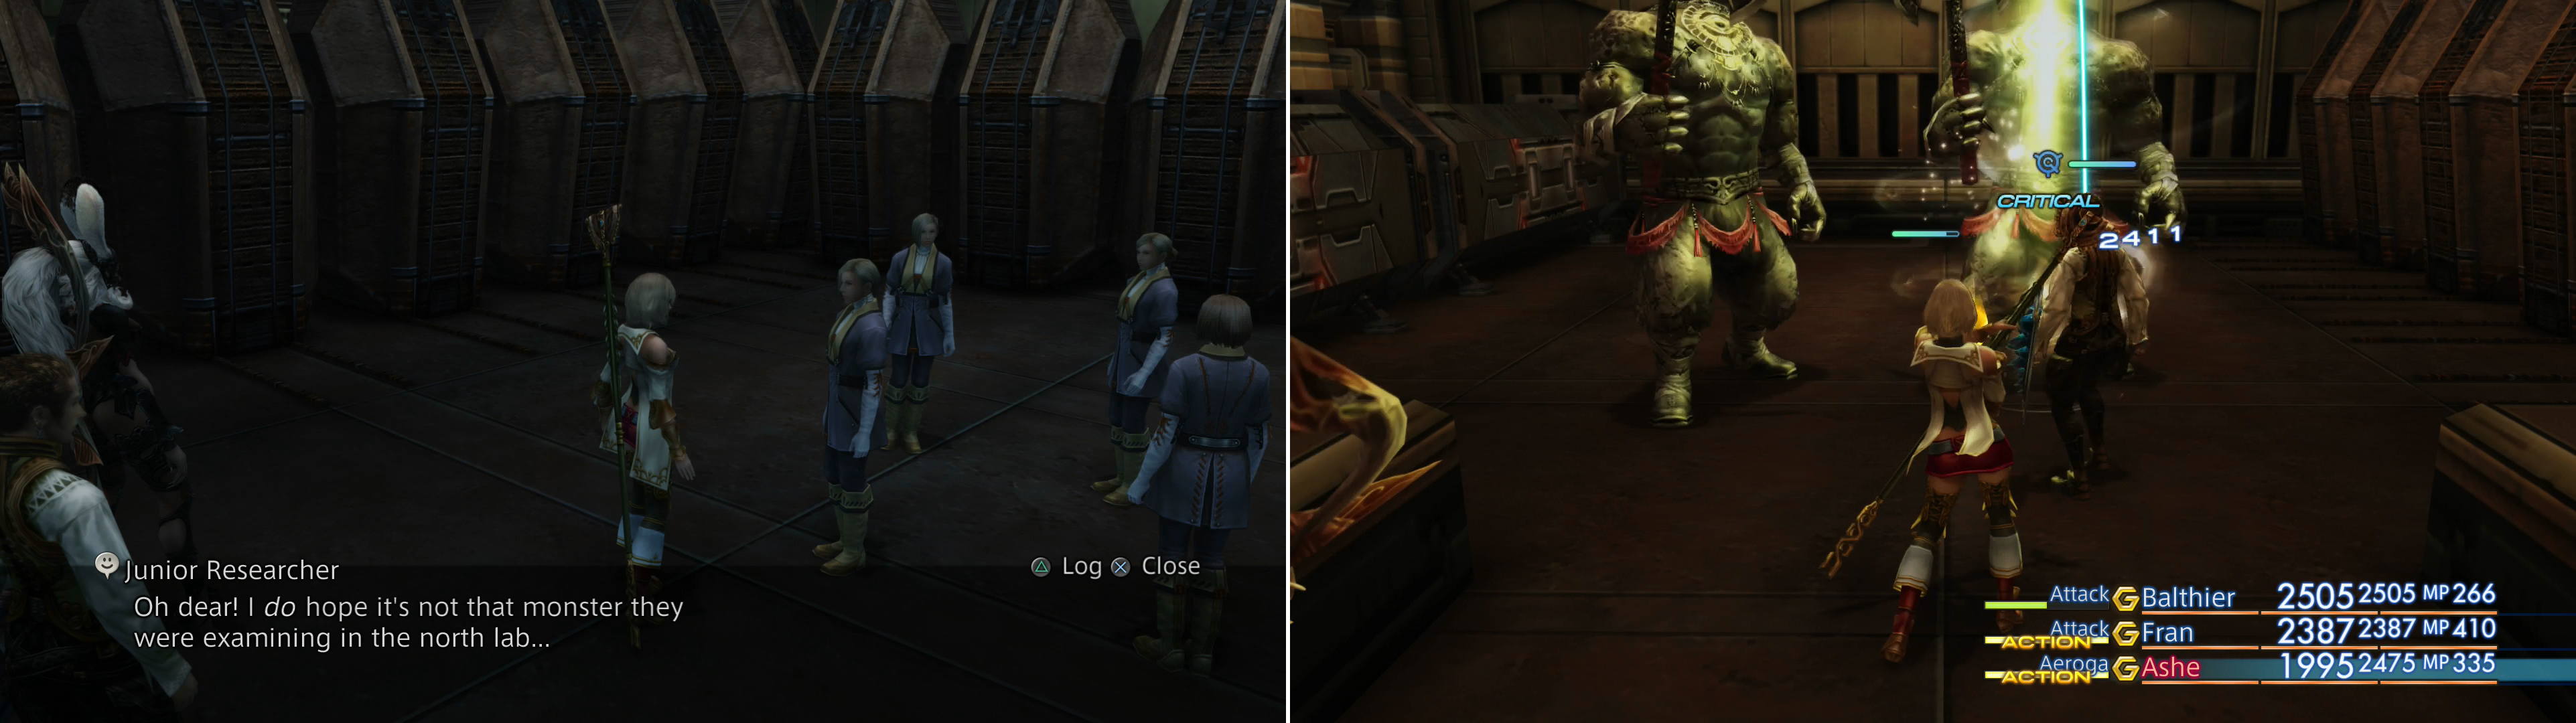 Talk to a Junior Researcher to learn about some monsters the Imperials were examining (left) which may refer to the Blood Gigas foes you find later on (right).